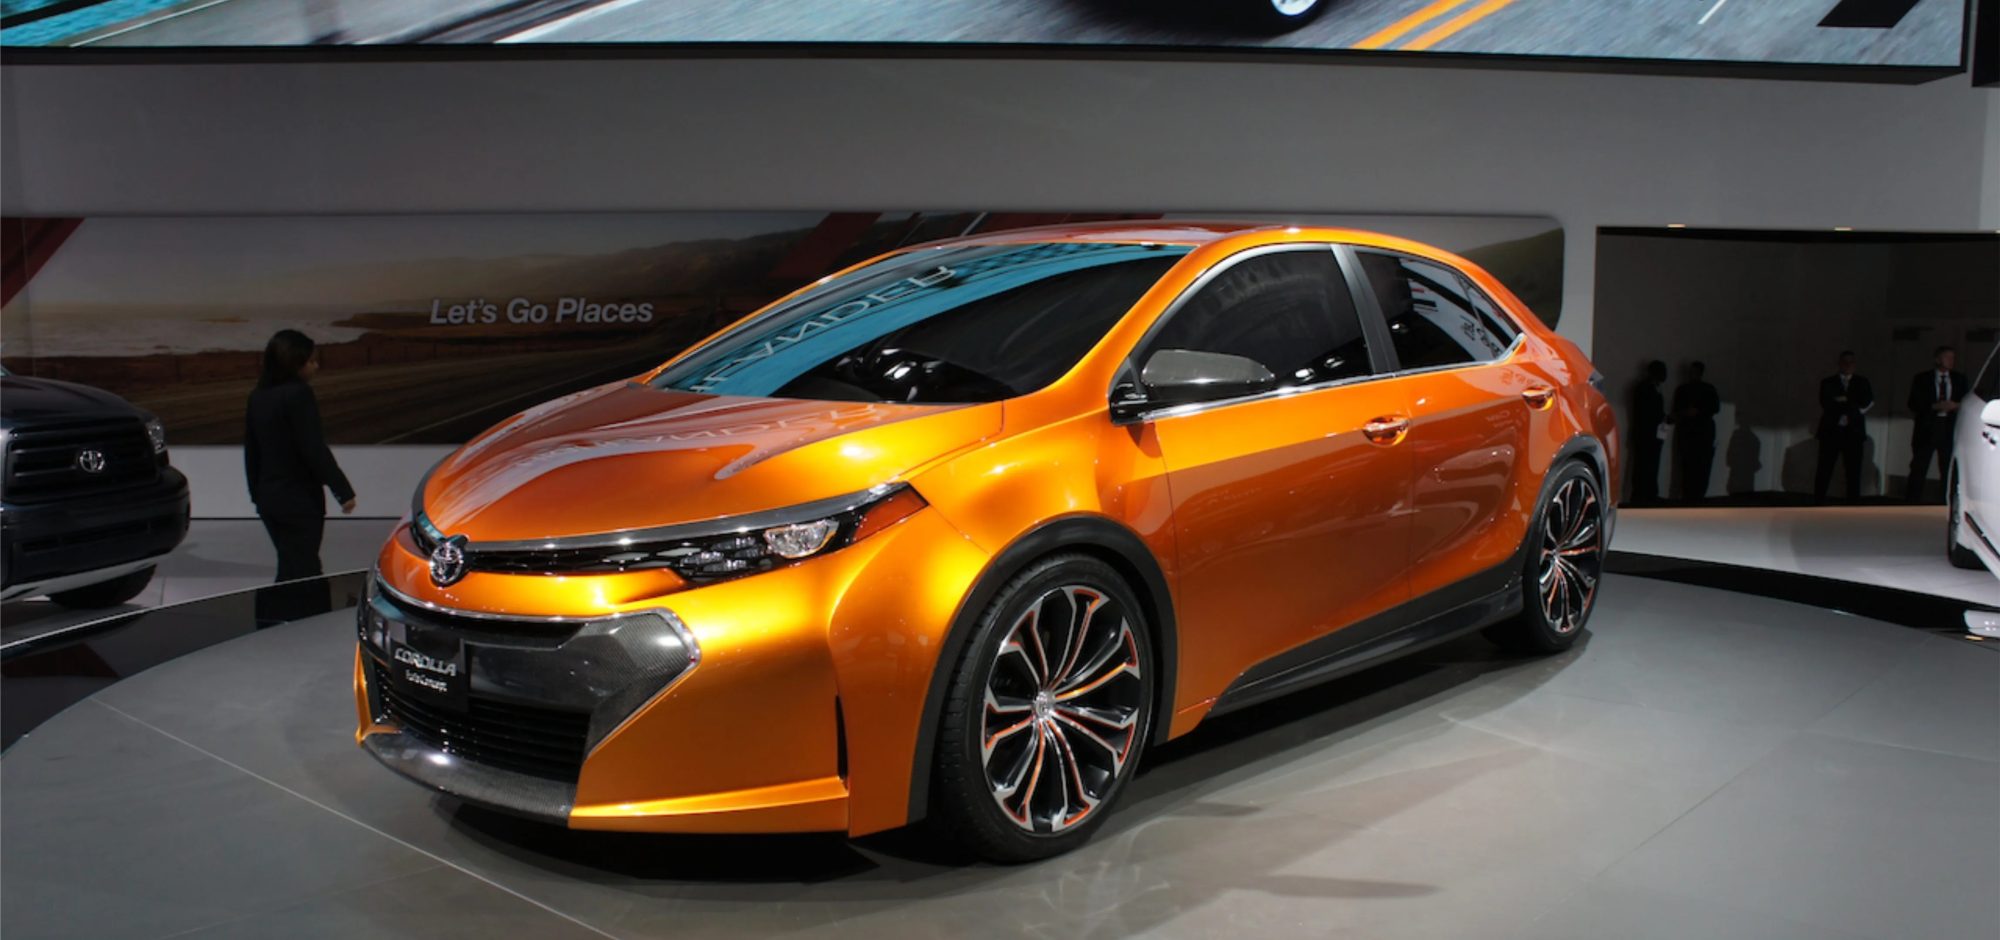 toyota corolla furia concept - Toyota with BYD will launch $30,000 electric small sedan in China